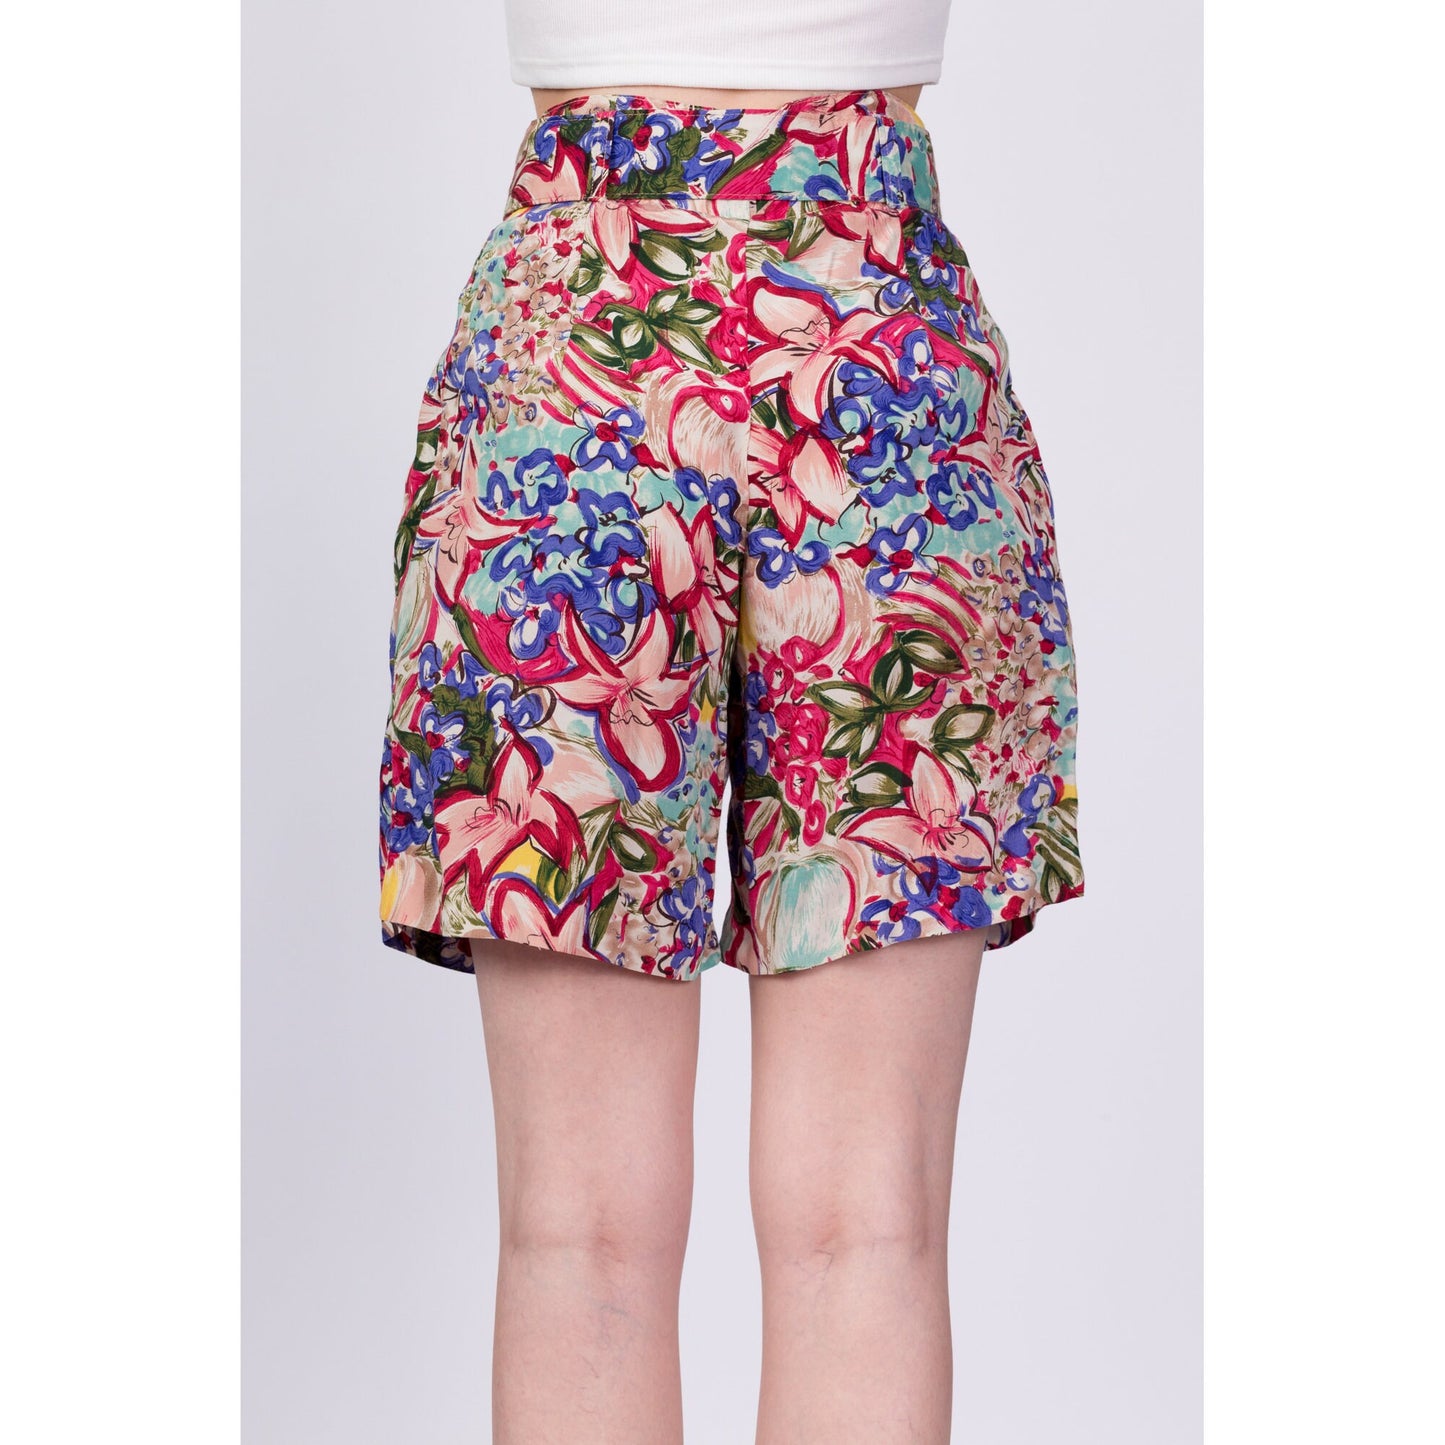 80s Floral Belted Shorts - Small, 26" 